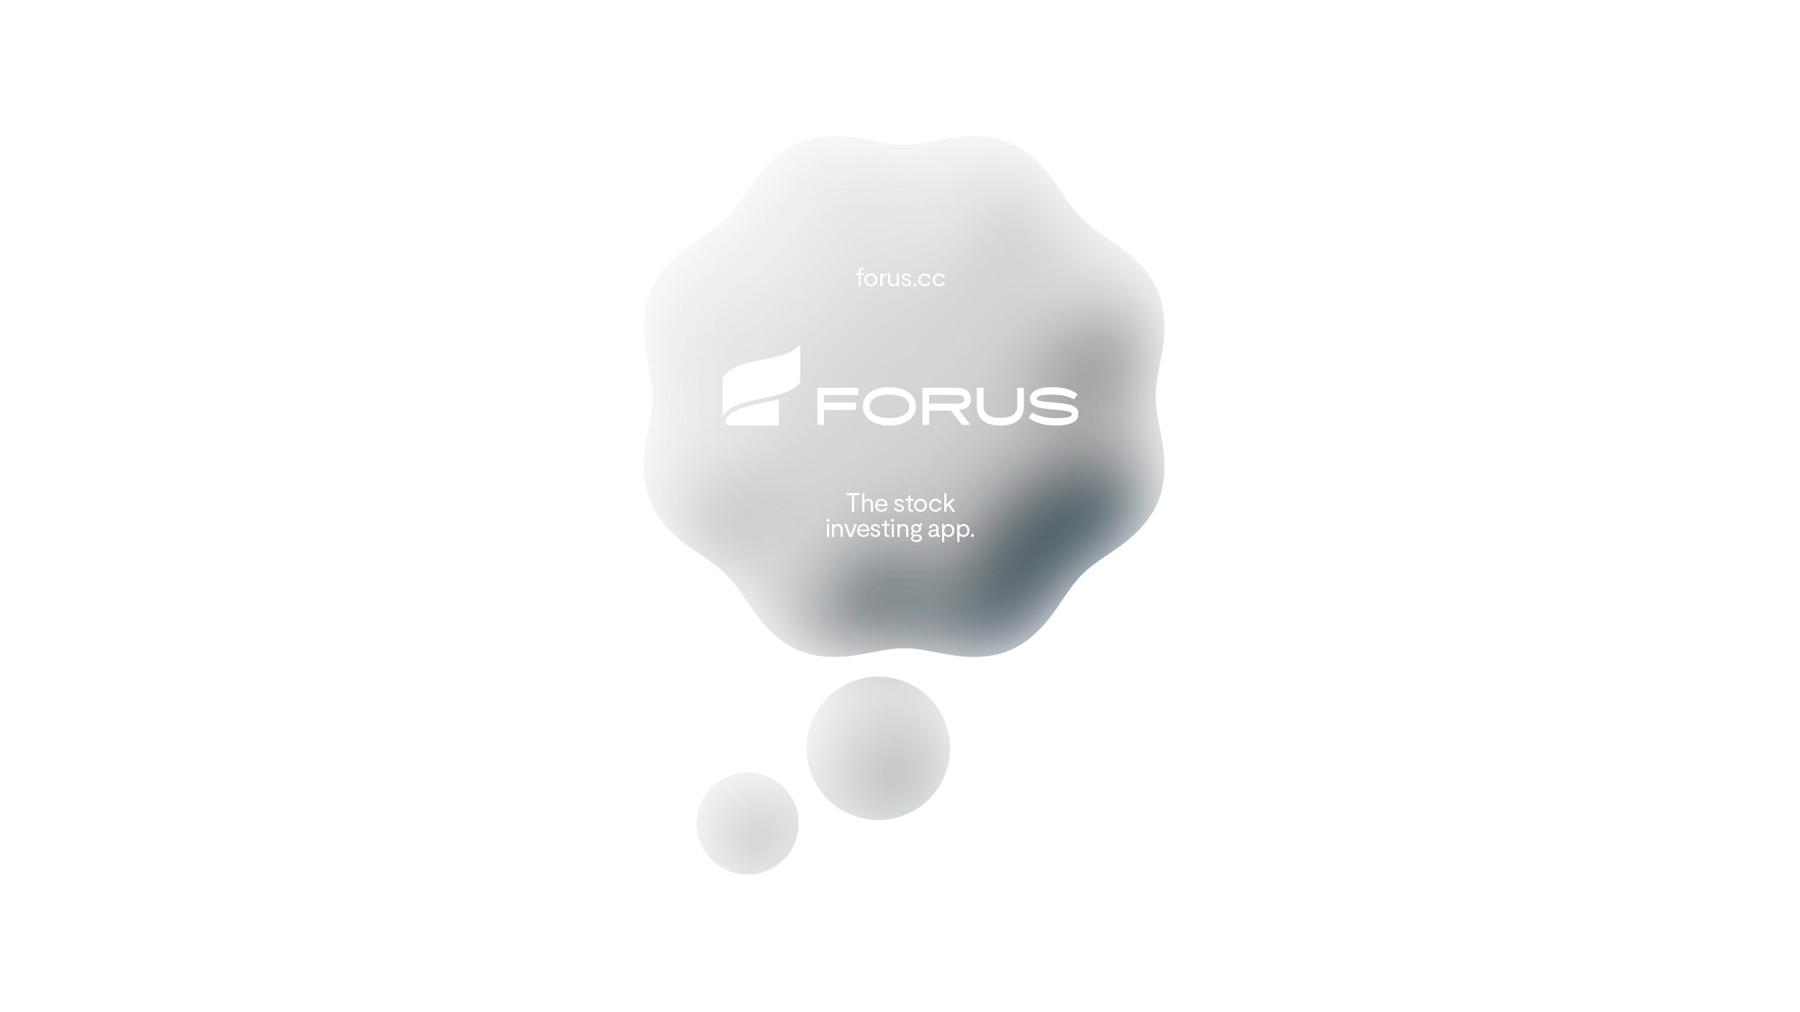 Forus Branding and Art Direction by Manifiesto